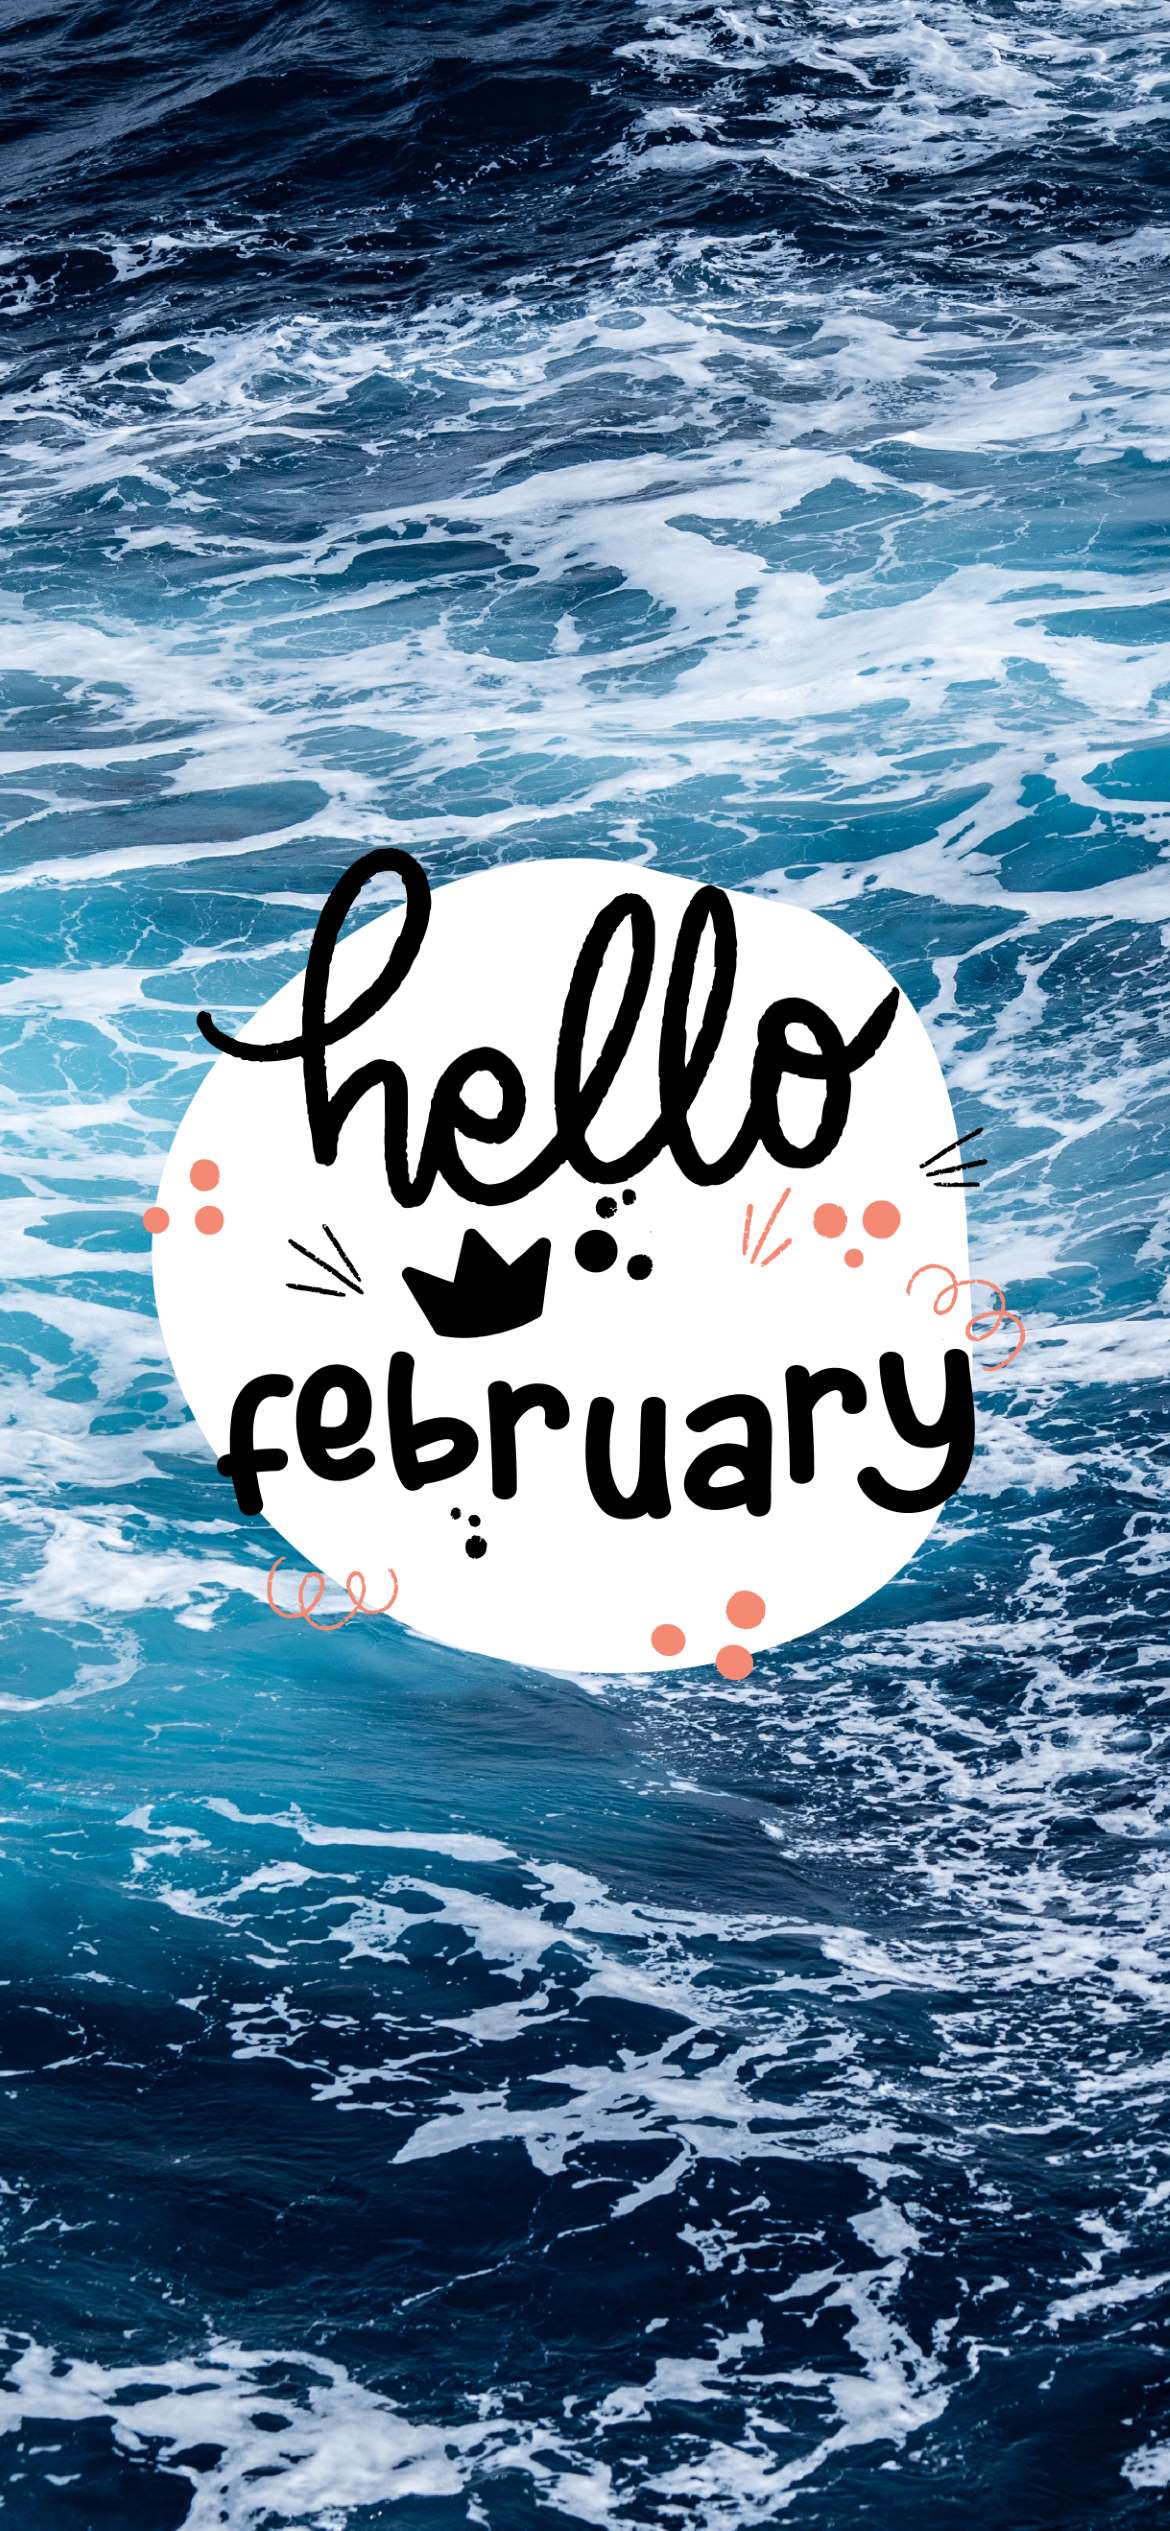 A poster that says hello february - February